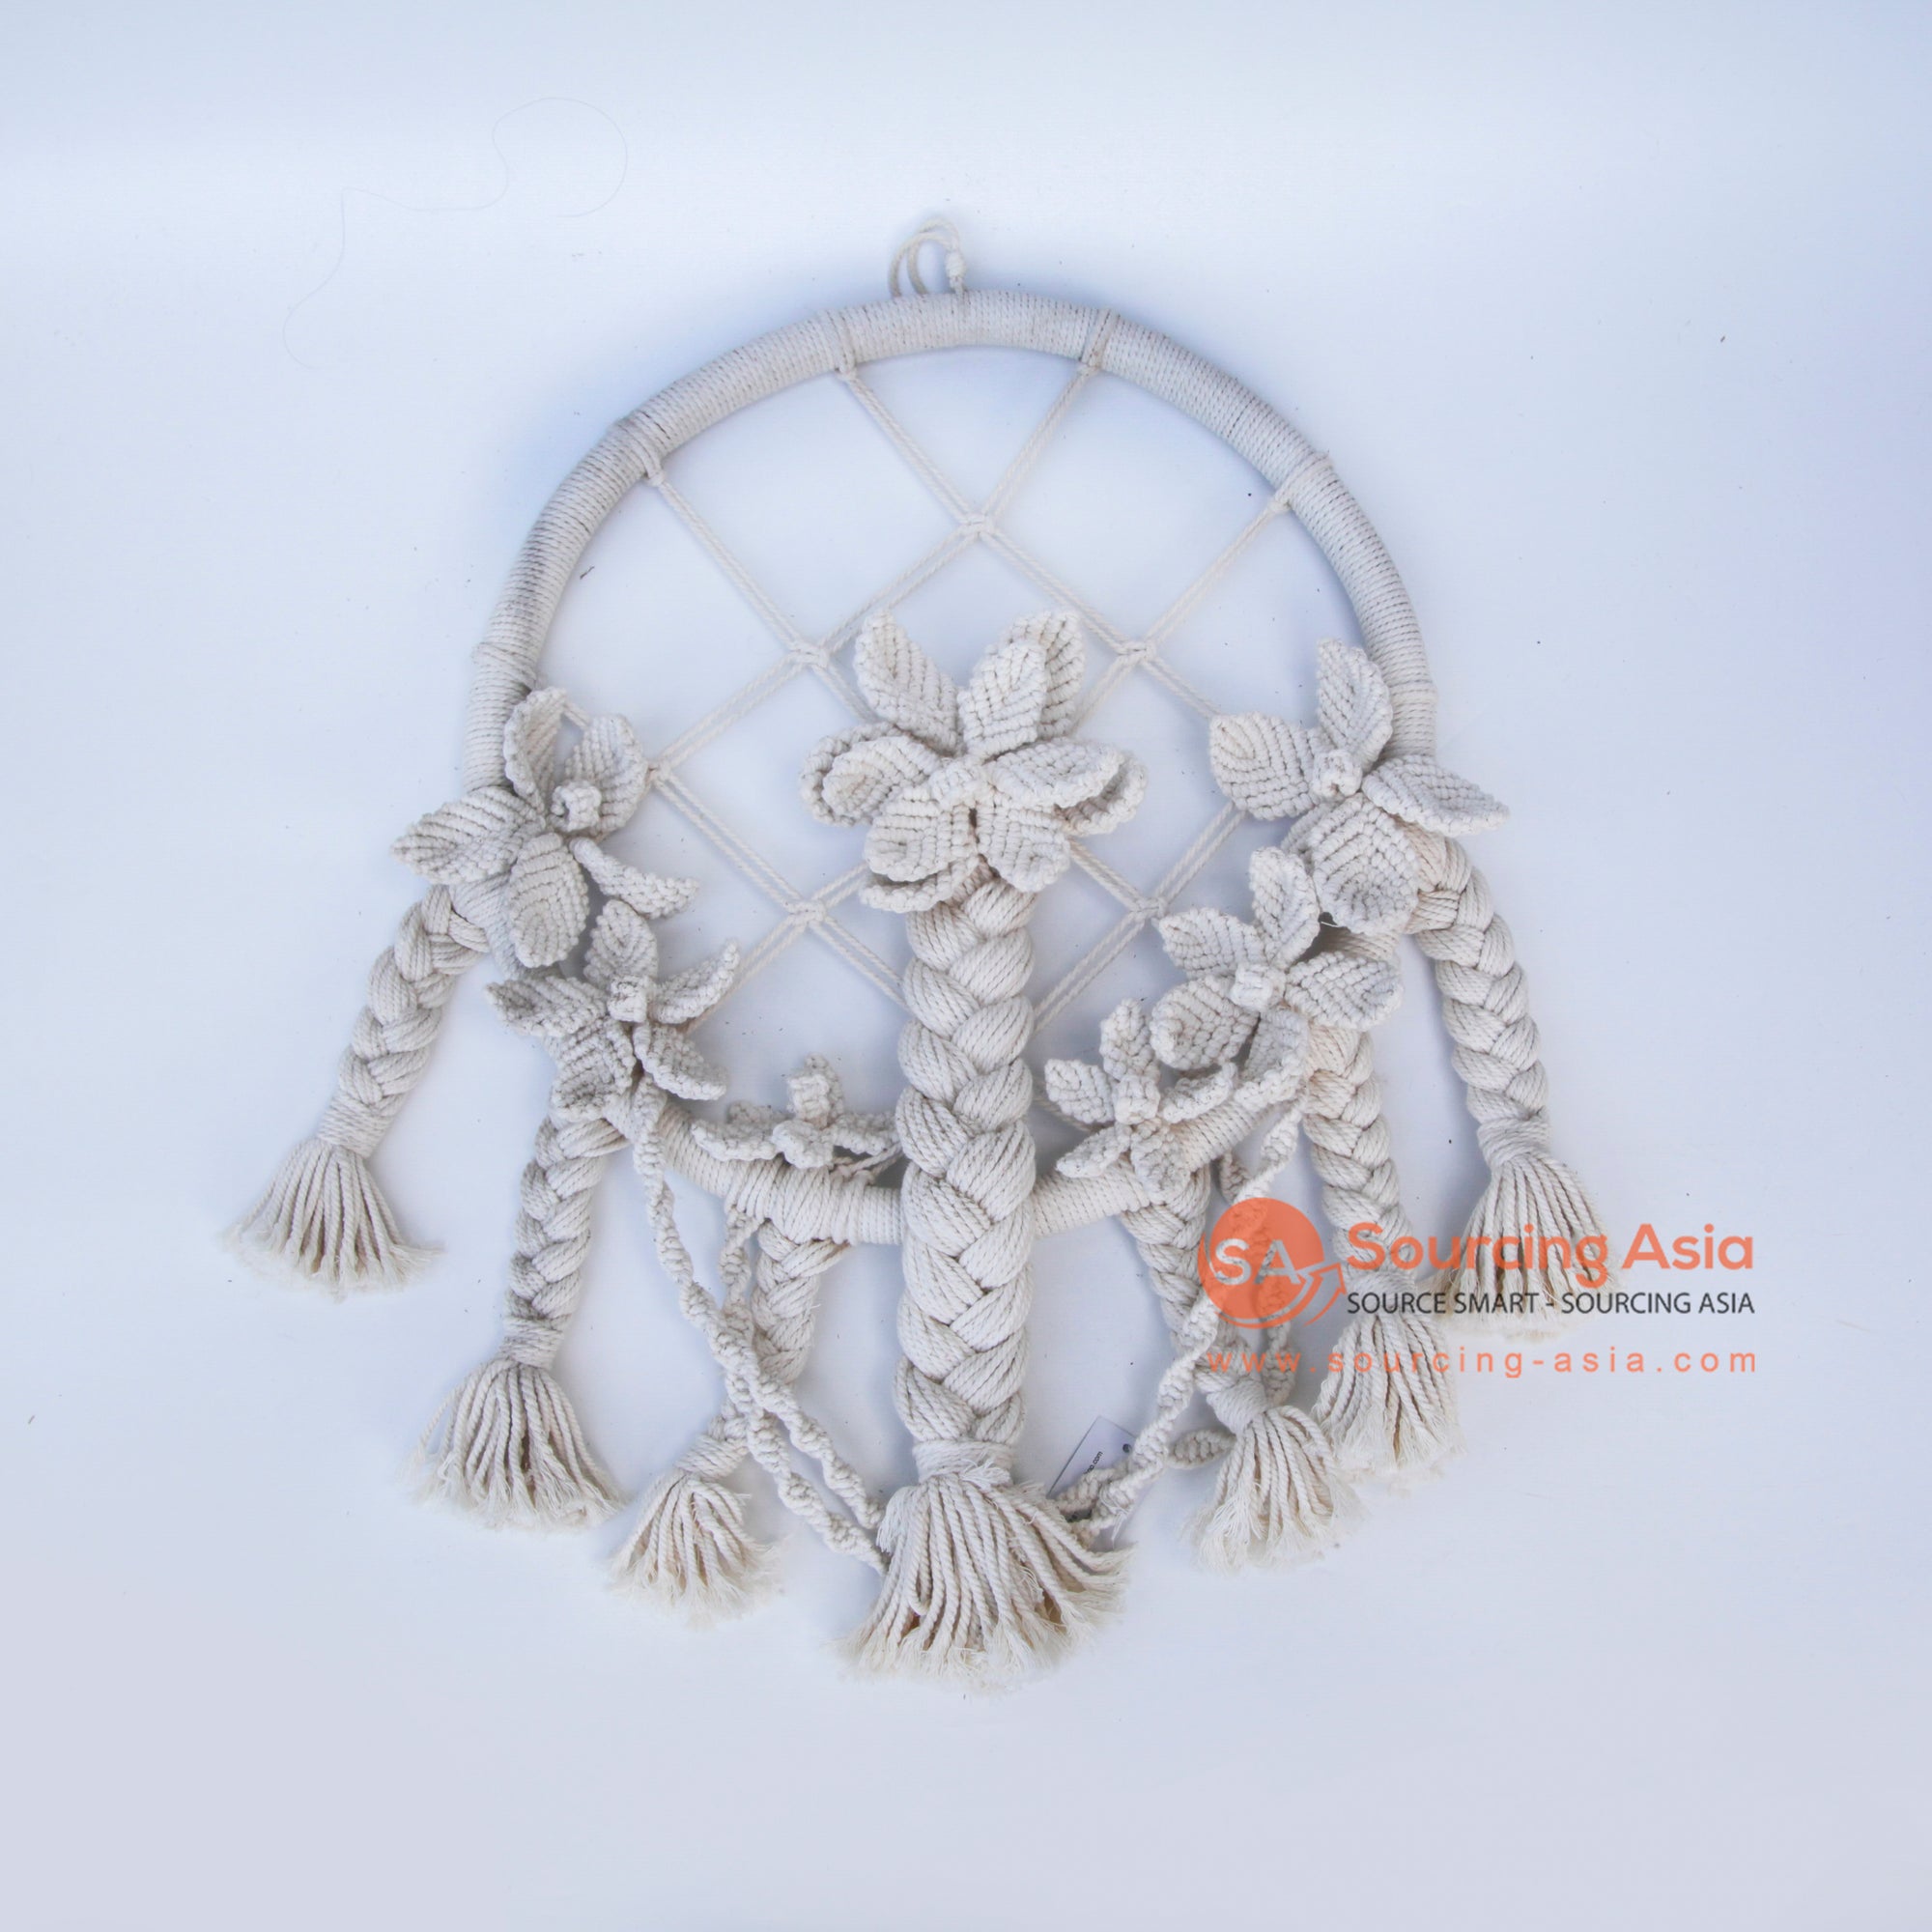 DHL066 WHITE MACRAME FLOWERS AND BRAIDS WALL DECORATION